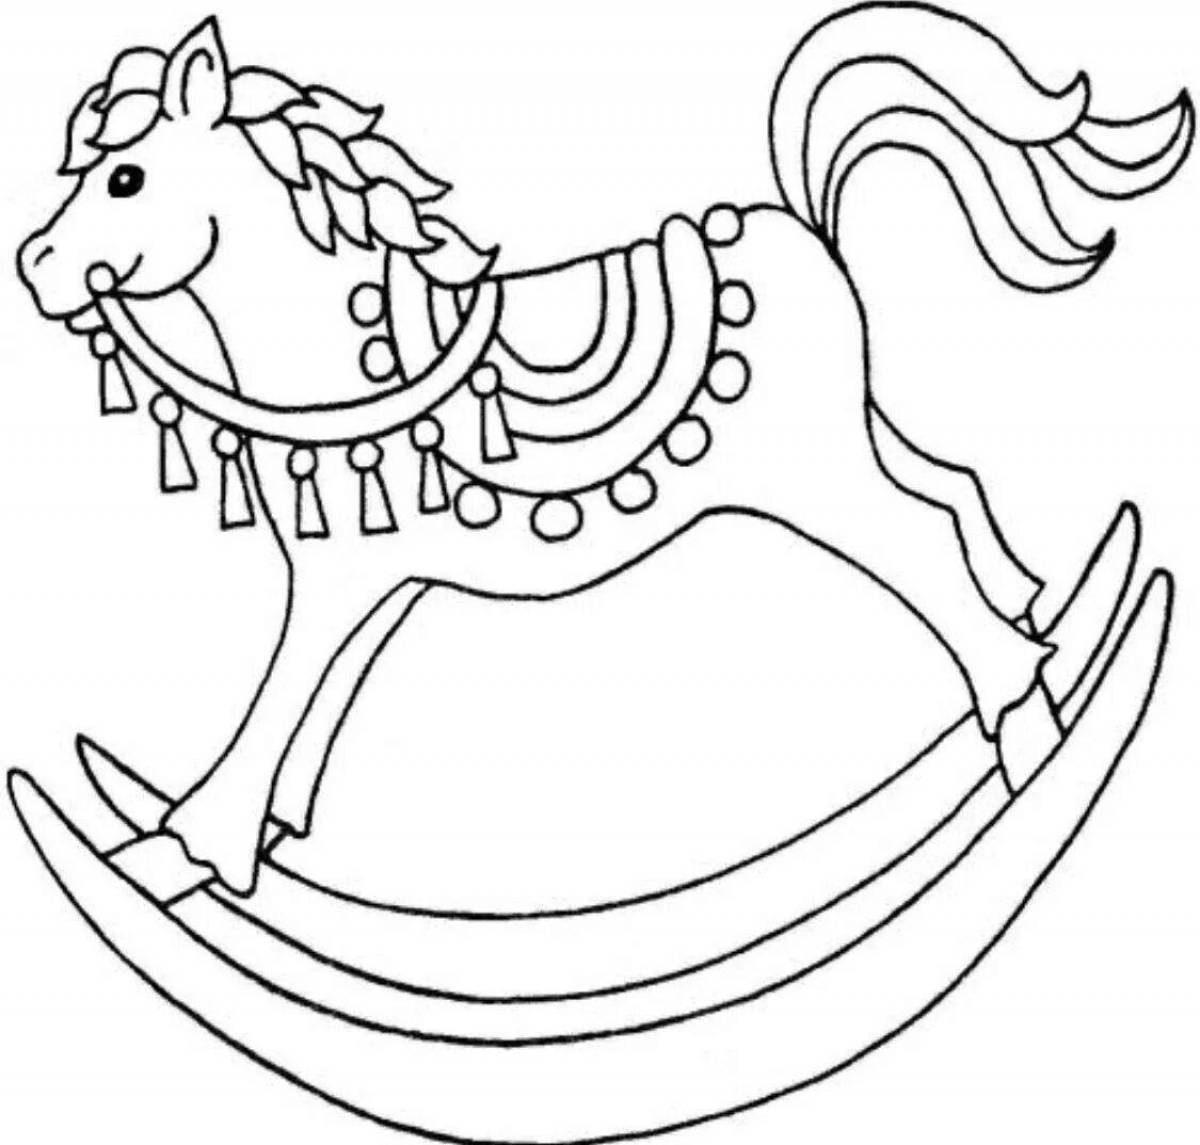 Adorable Gorodets horse coloring book